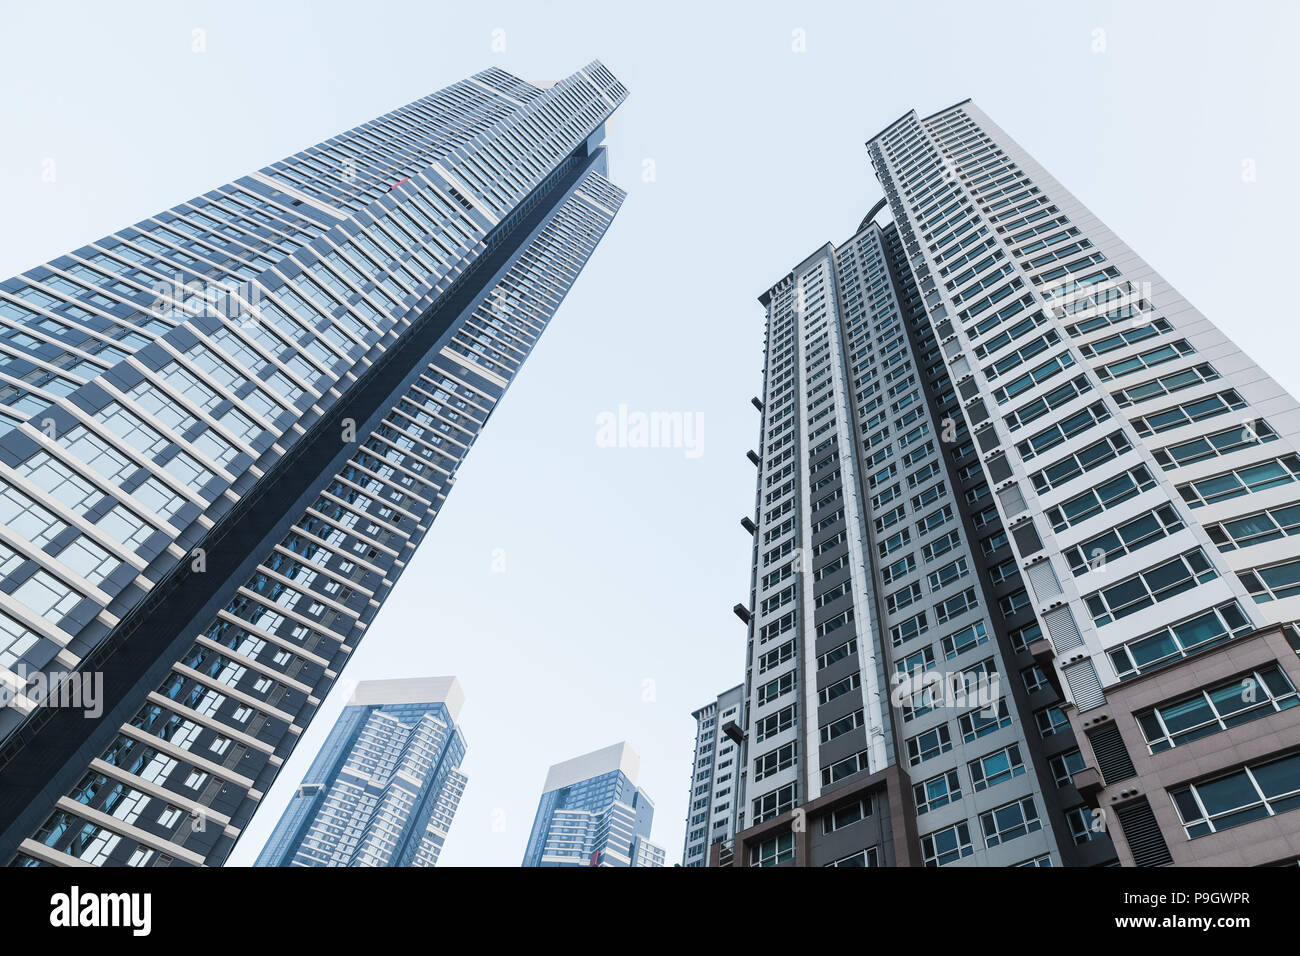 Big city skyline with skyscrapers, high-rise office buildings and living houses in Busan, South Korea Stock Photo